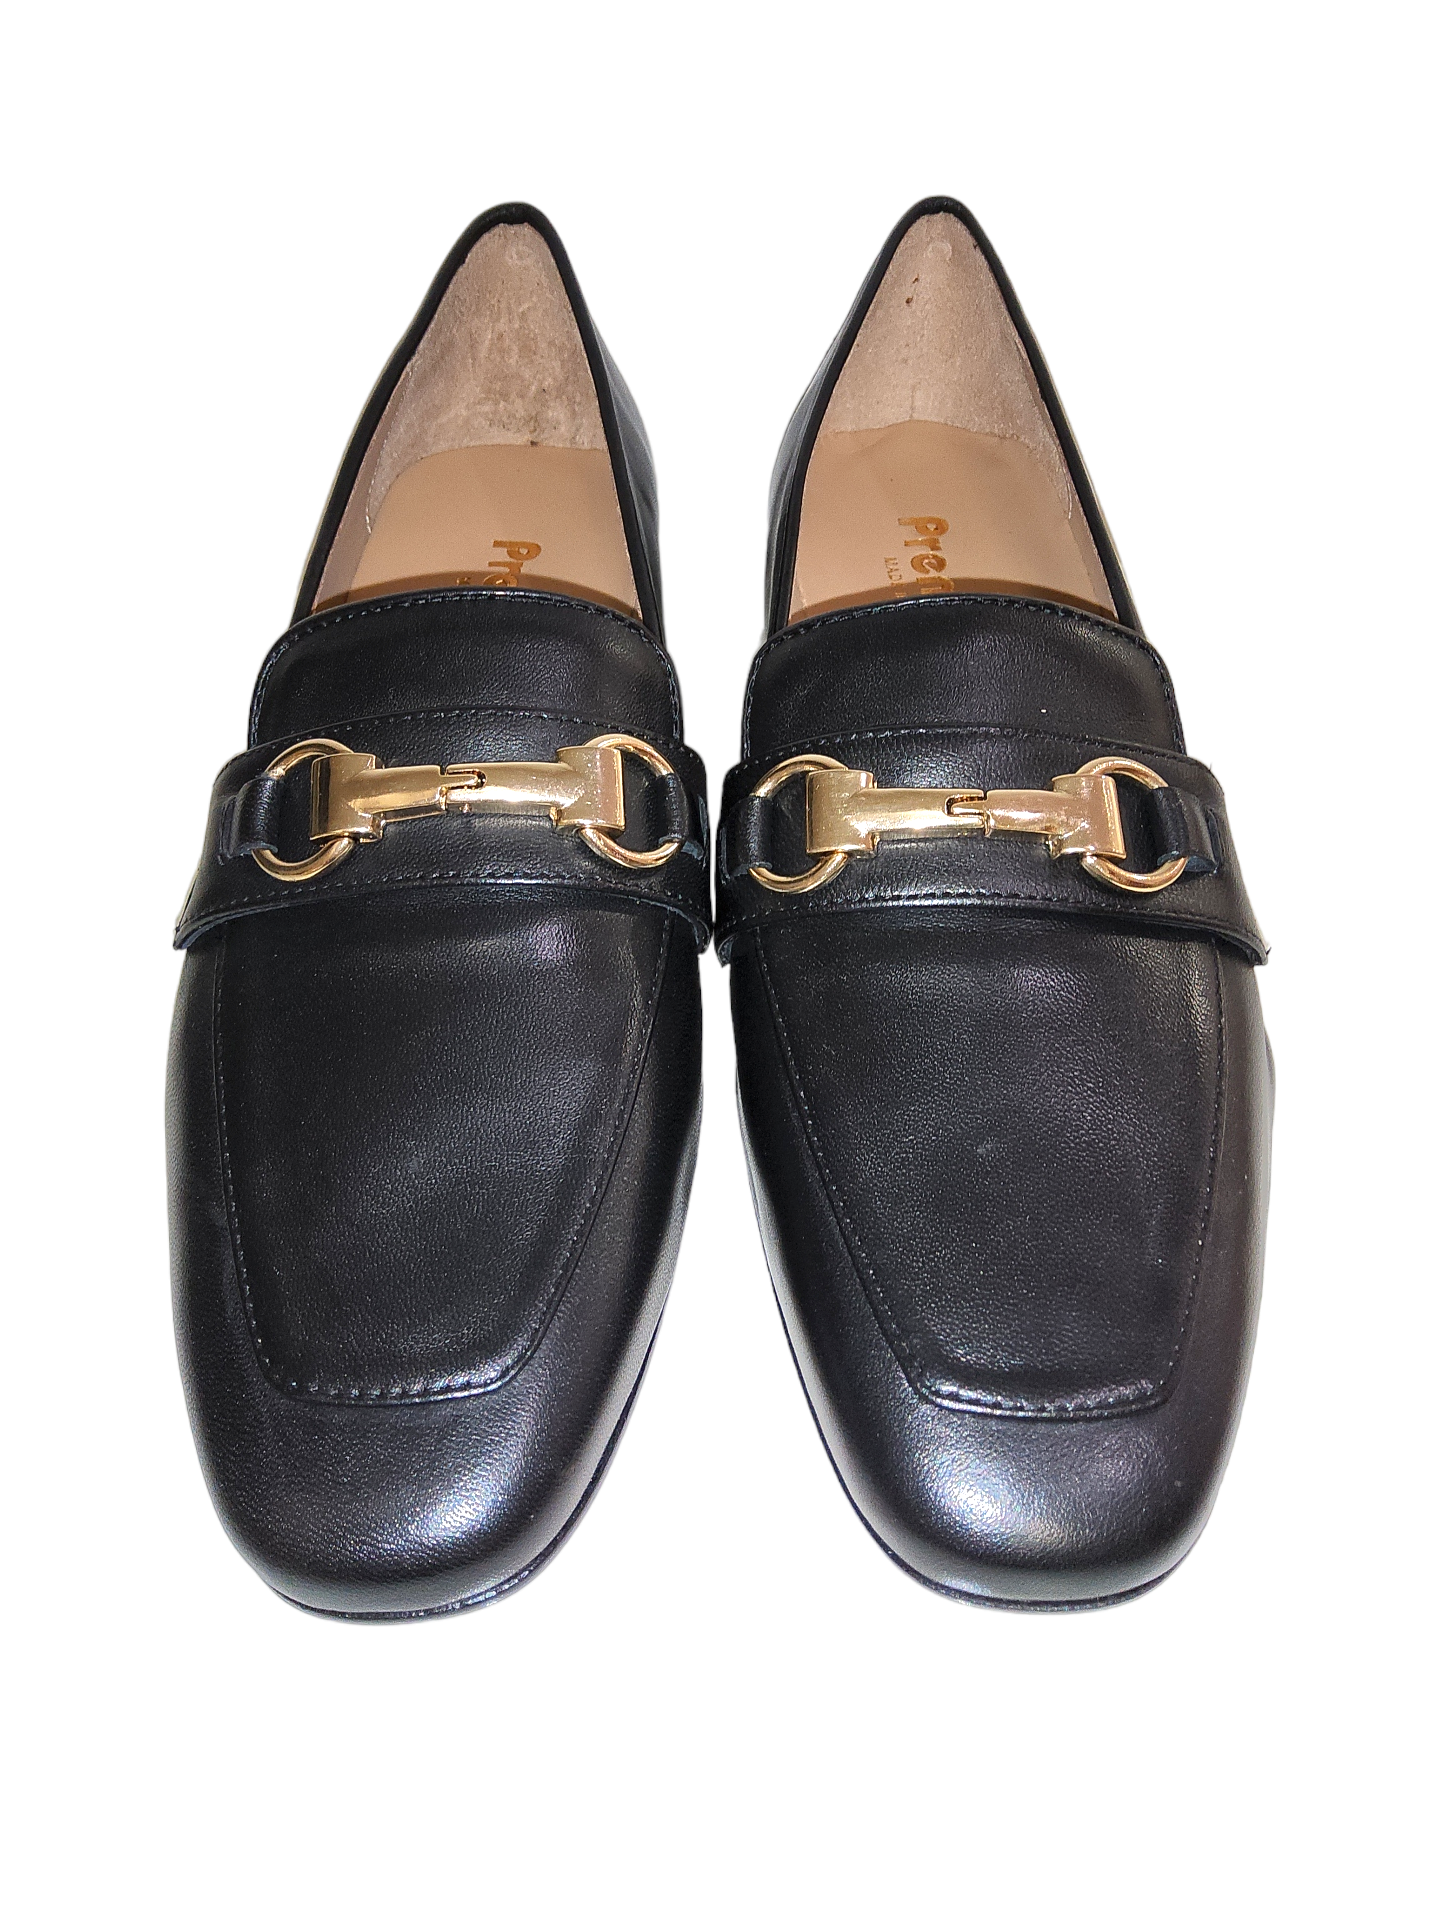 Black leather heeled loafers